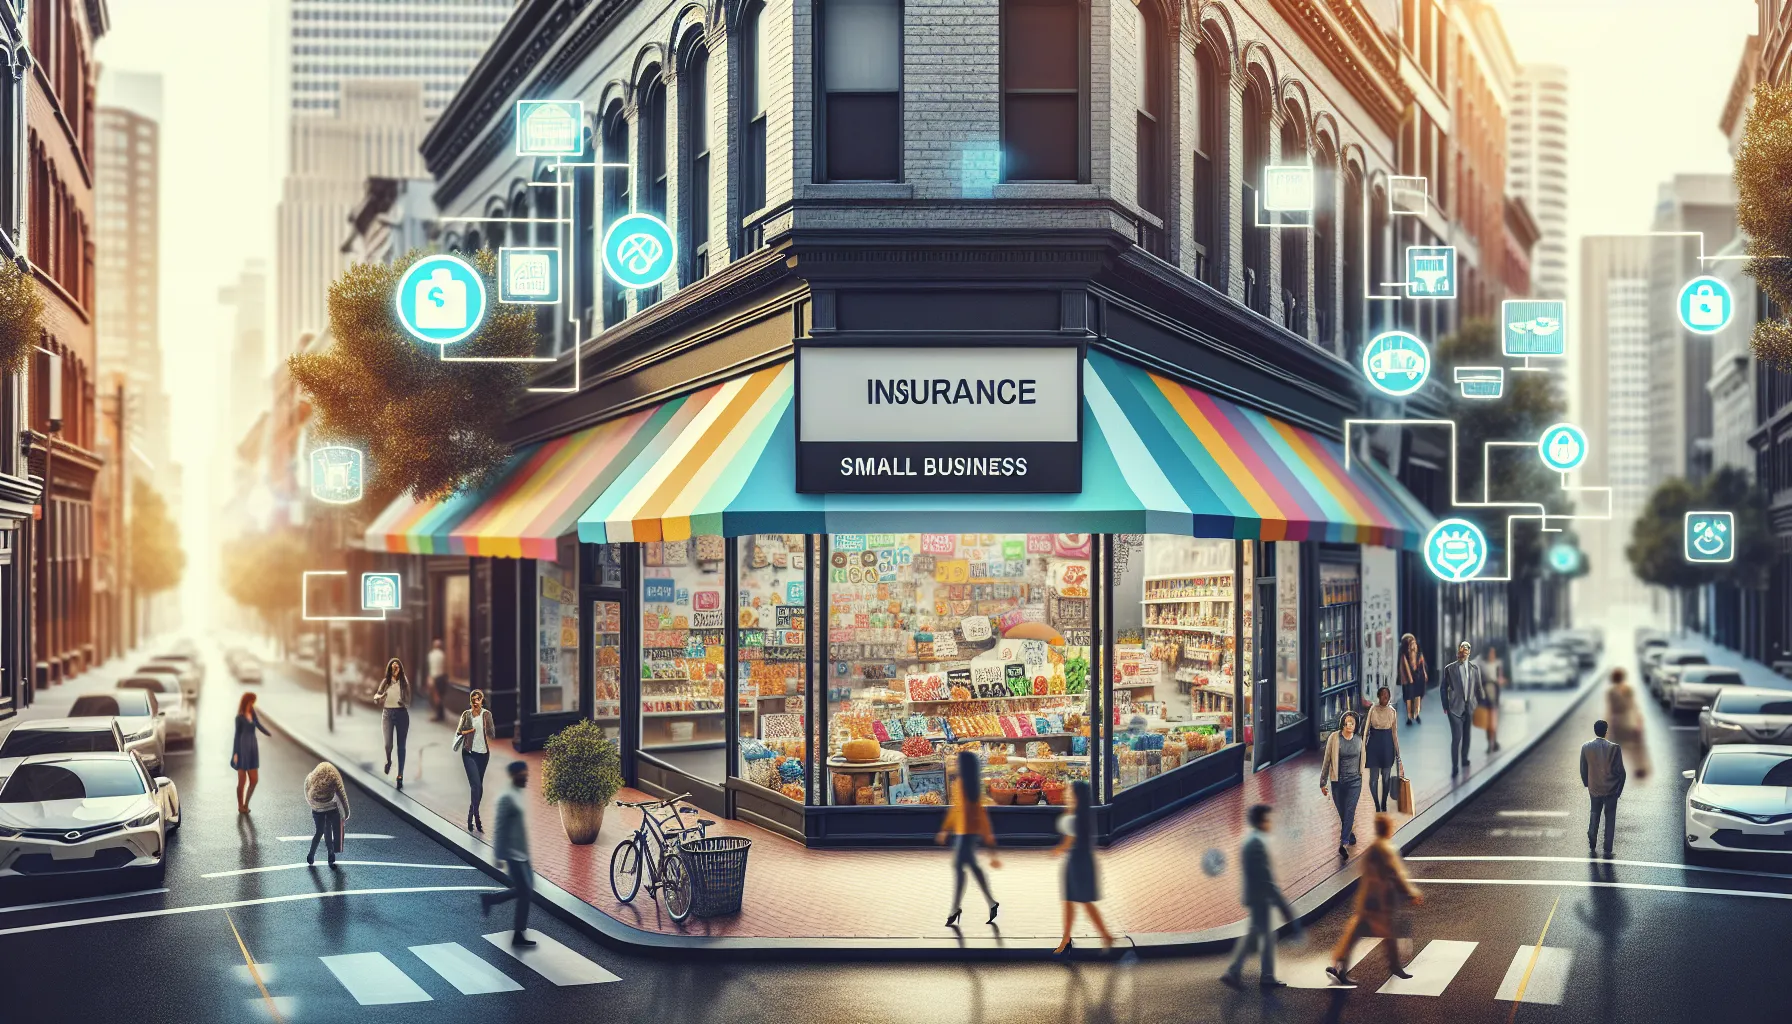 What Are Misconceptions About Small Business Insurance?